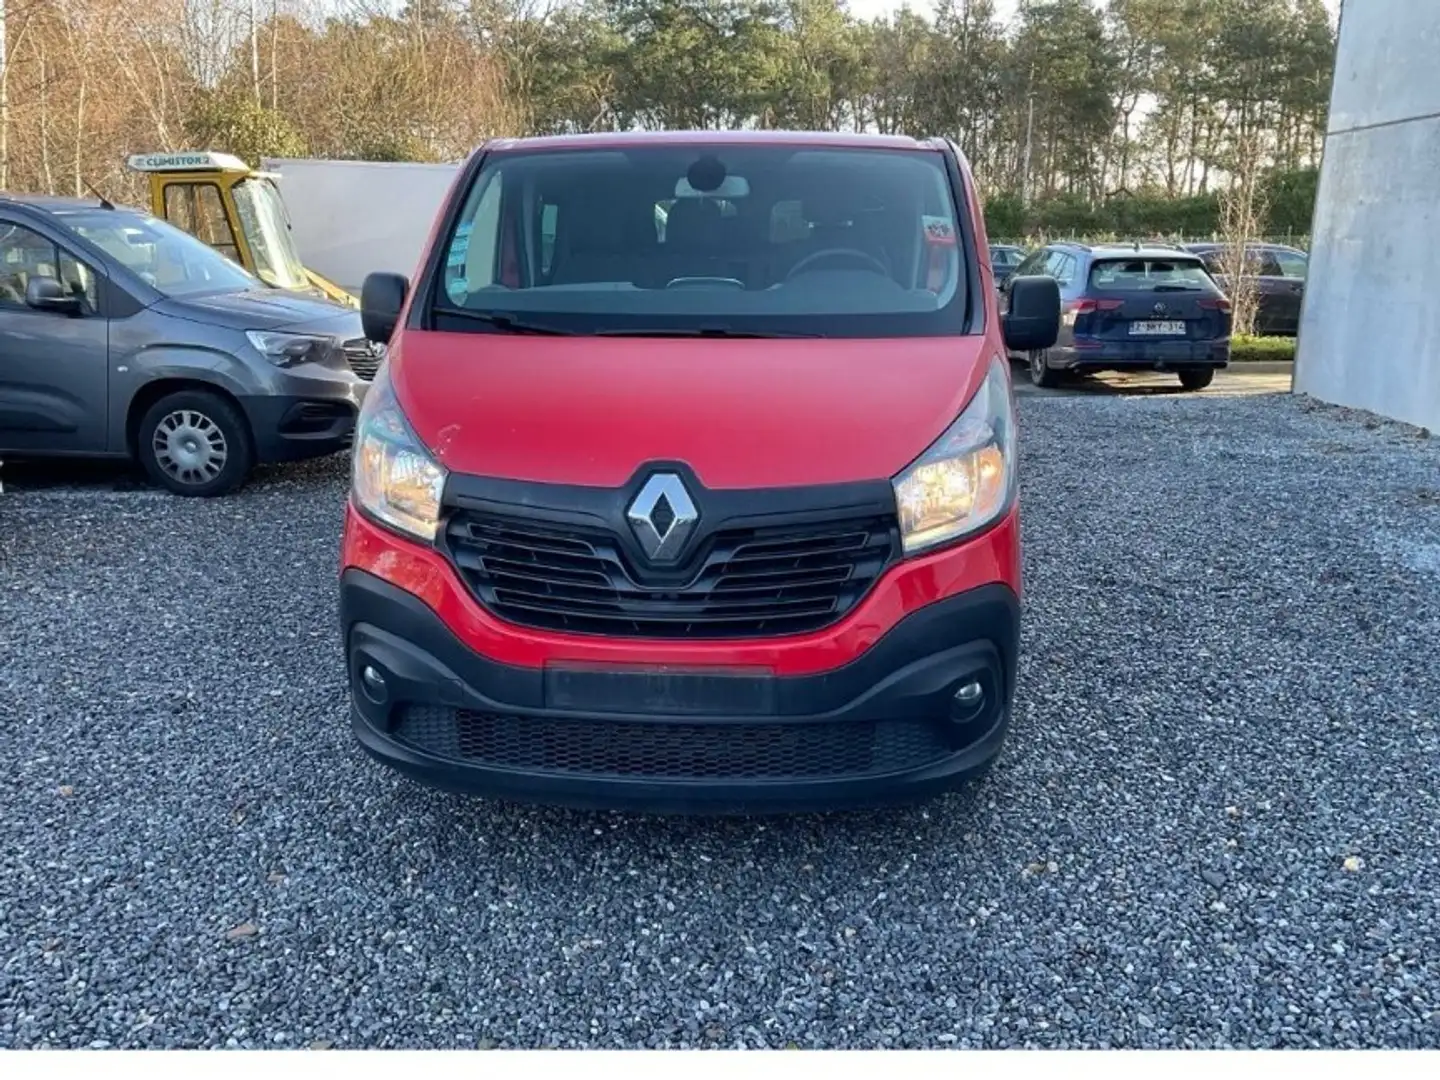 Renault Trafic 1.6 dci 105000km 6 personnes utilitaires ct ok Rouge - 1